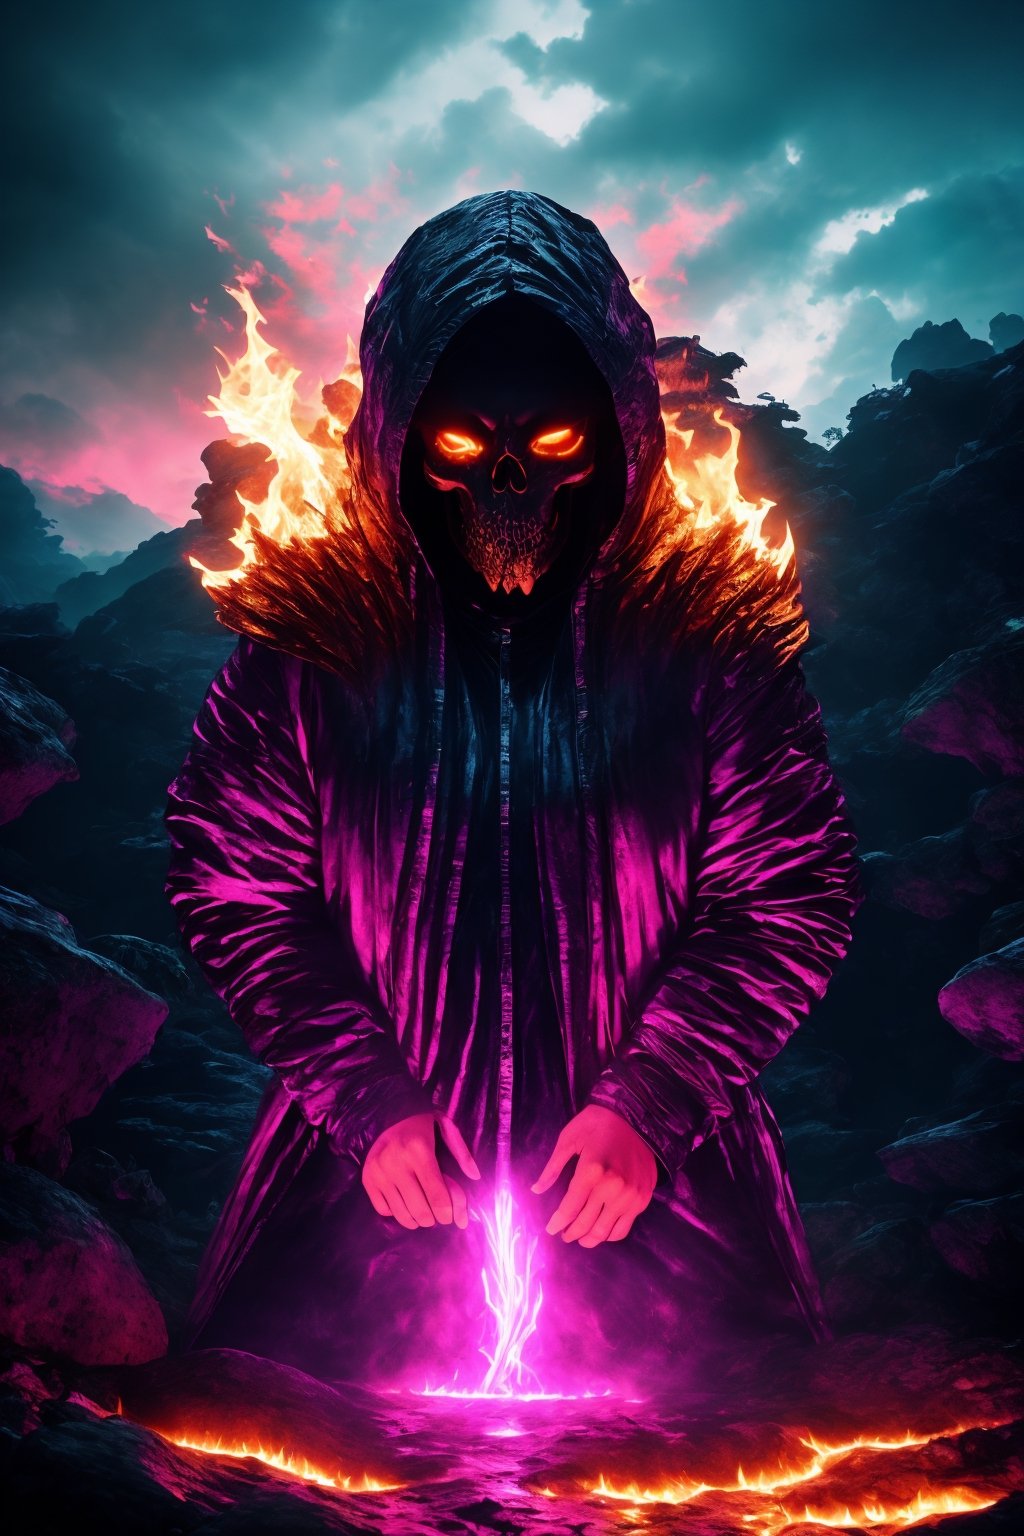 (High quality, UHD, strong highlights), (vibrant volumetric pink lighting, Luminous Studio graphics engine), A surreal and high-resolution UHD scene emerges with strong highlights, bathed in vibrant volumetric pink lighting from the Luminous Studio graphics engine. In the center, a mysterious figure with a skull, burning eyes, and a fiery mouth stands beside a bioluminescent river waterfall, casting a fantasy-like glow on the surroundings.